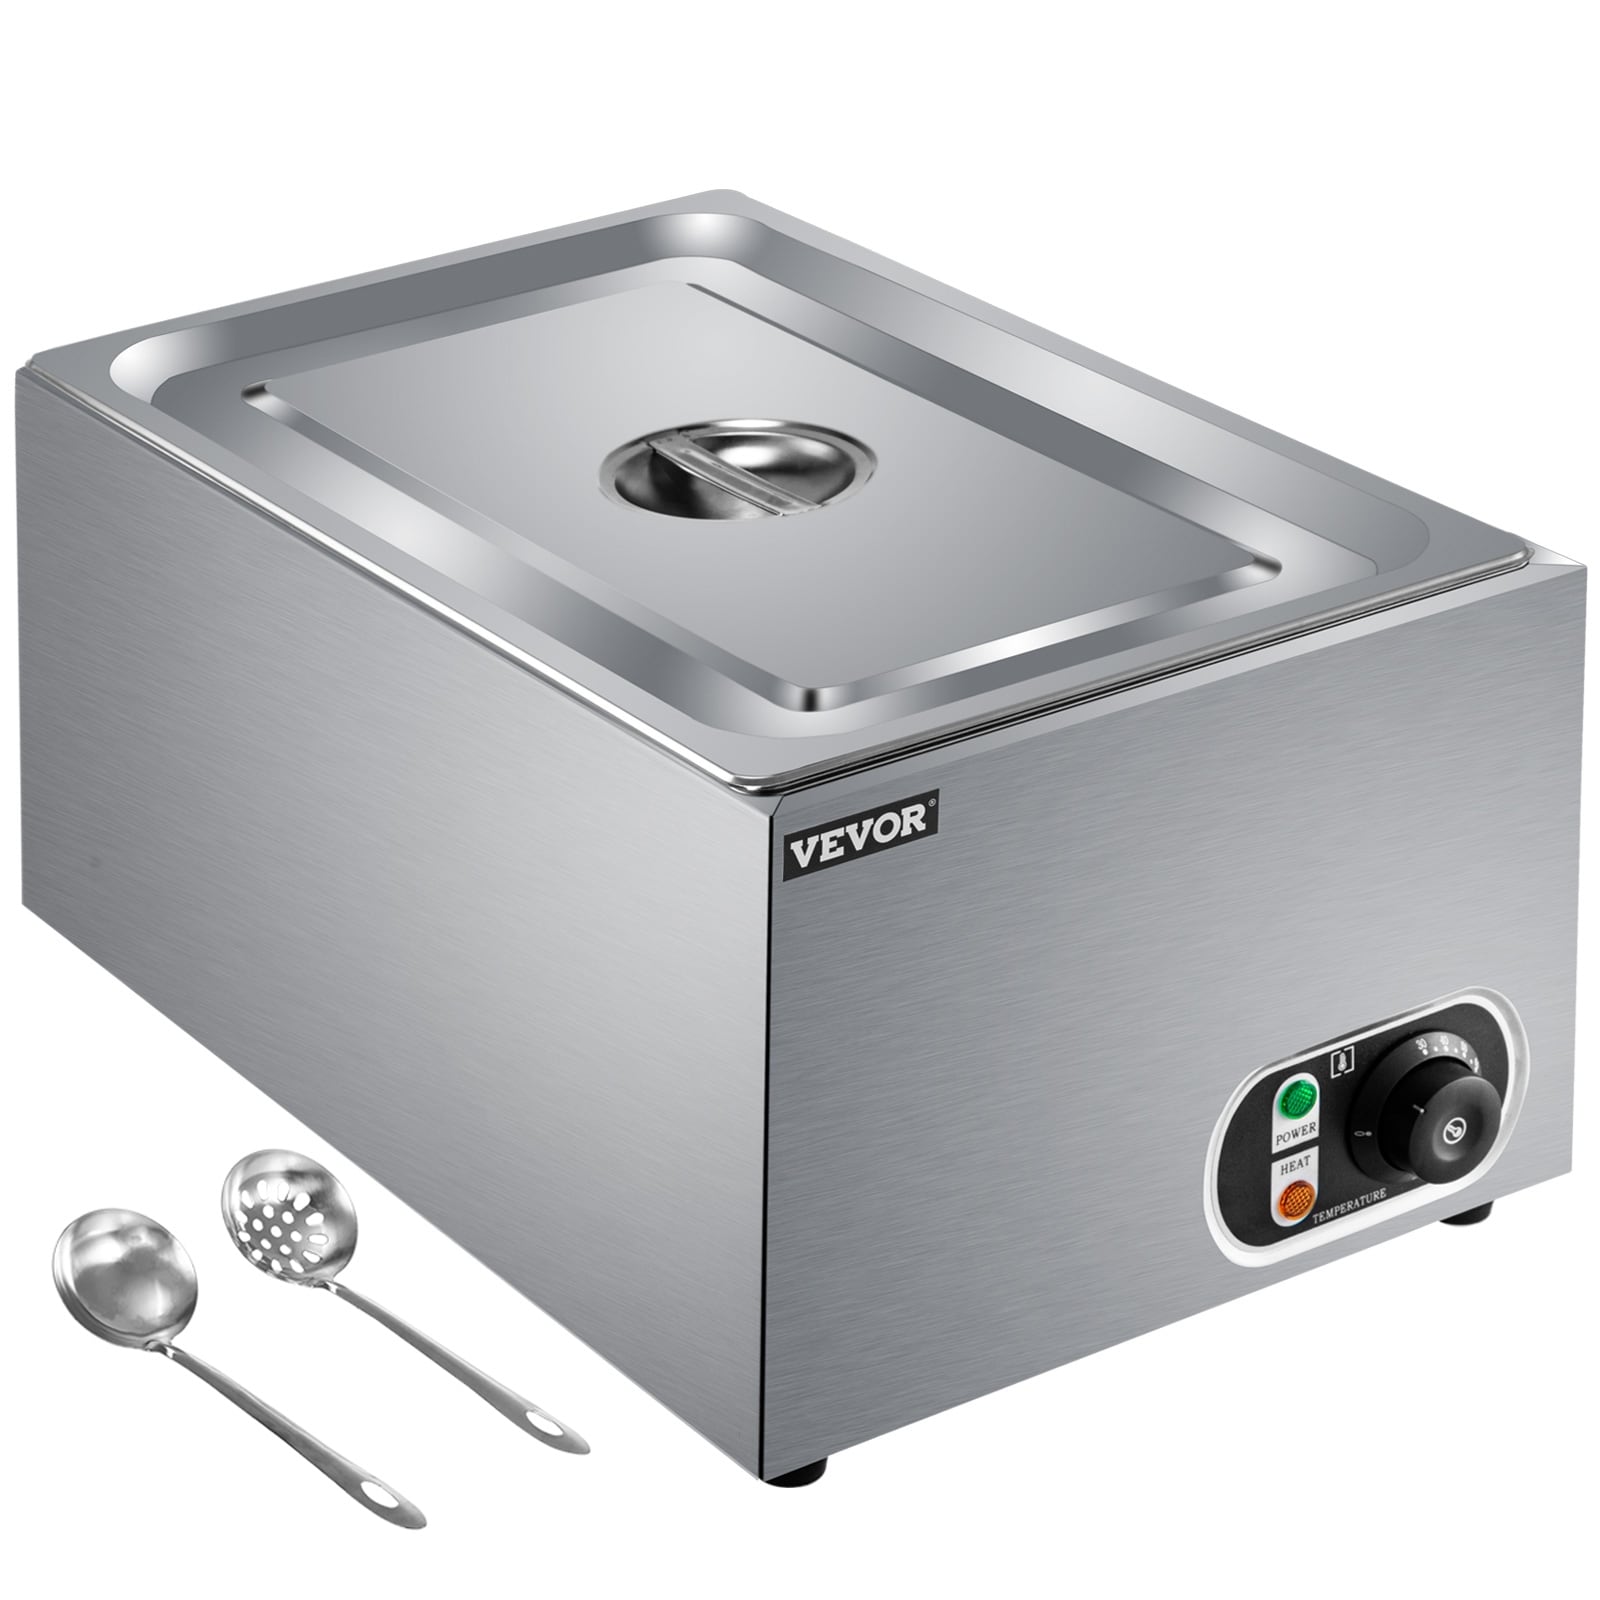 https://ak1.ostkcdn.com/images/products/is/images/direct/42aaee3a5d6316bce02b7a2c8809c7313a21057e/VEVOR-Commercial-Food-Warmer-Bain-Marie-27Qt-Full-Size-Buffet-Food-Warmer-SUS.jpg